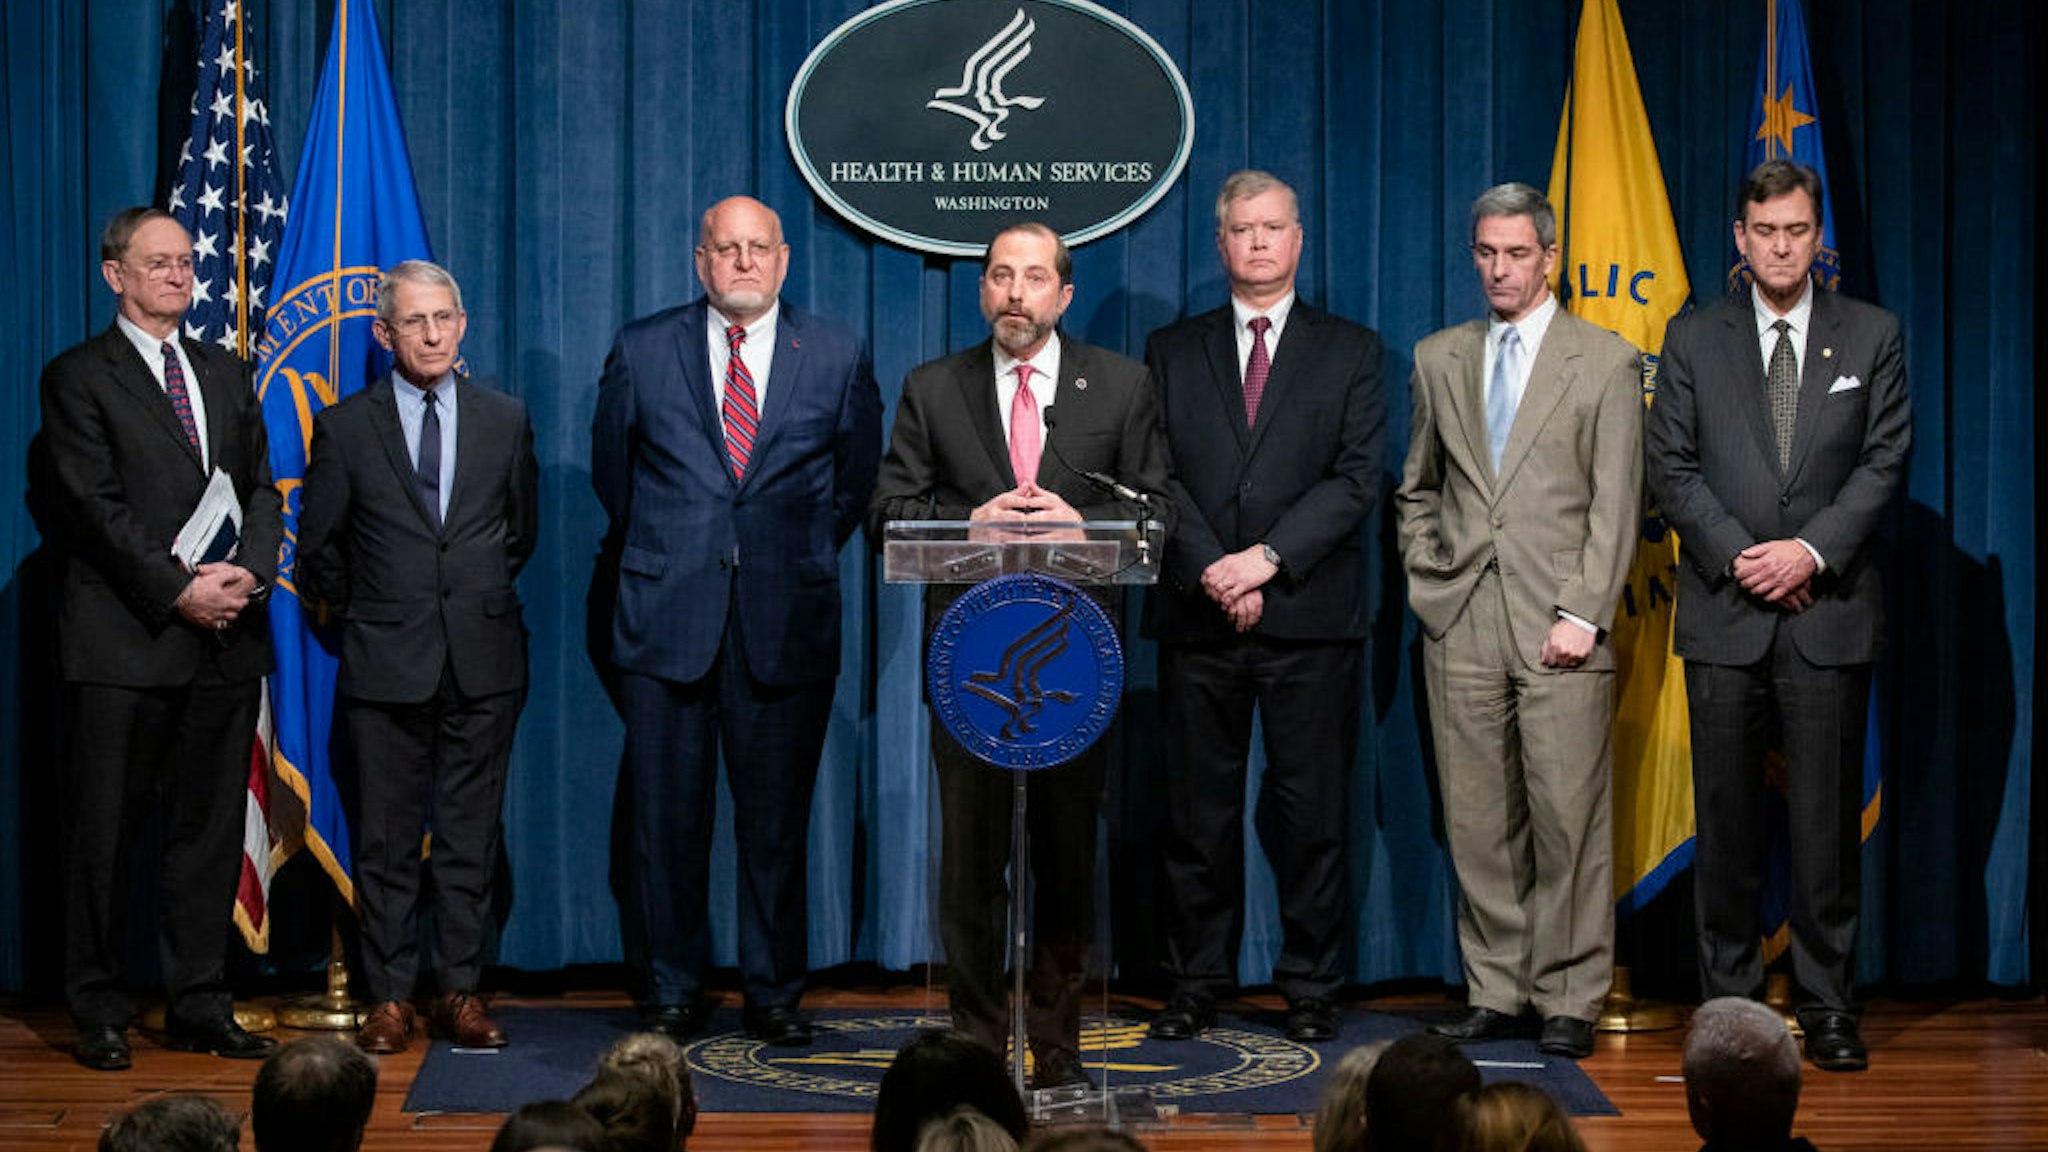 Health and Human Services Secretary Alex Azar speaks during a press conference on recent developments with the coronavirus with other members of President Trump's Coronavirus Task Force at the Health and Human Services headquarters on February 7, 2020 in Washington, DC. Li Wenliang, the 33-year-old ophthalmologist based in Wuhan who was detained by the Chinese Government after raising early warnings about the virus, died on Friday from the virus. Other task force members joining Secretary Azar on stage are (L-R) Assistant Secretary for Preparedness and Response Robert Kadlec, National Institute of Allergy and Infectious Diseases Director Dr. Anthony Fauci, Centers for Disease Control and Prevention Director Dr. Robert Redfield, State Department Deputy Secretary Stephen Biegun, Homeland Security Acting Deputy Secretary Ken Cuccinelli, and Department of Transportation Acting Under Secretary for Policy Joel Szabat.